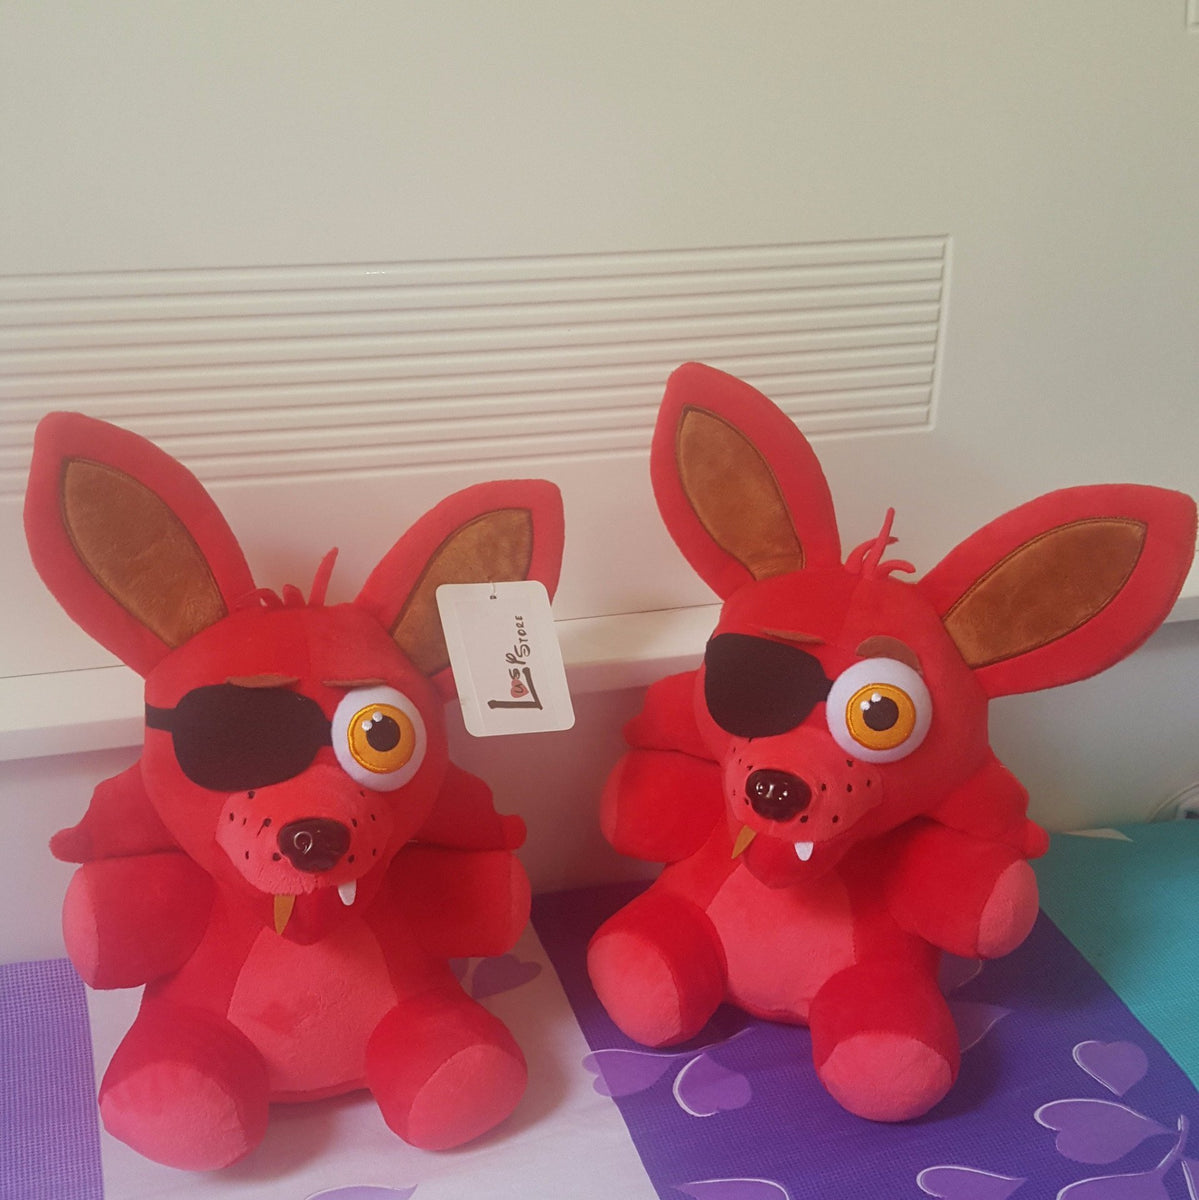 Five Nights At Freddy's Foxy plush toys